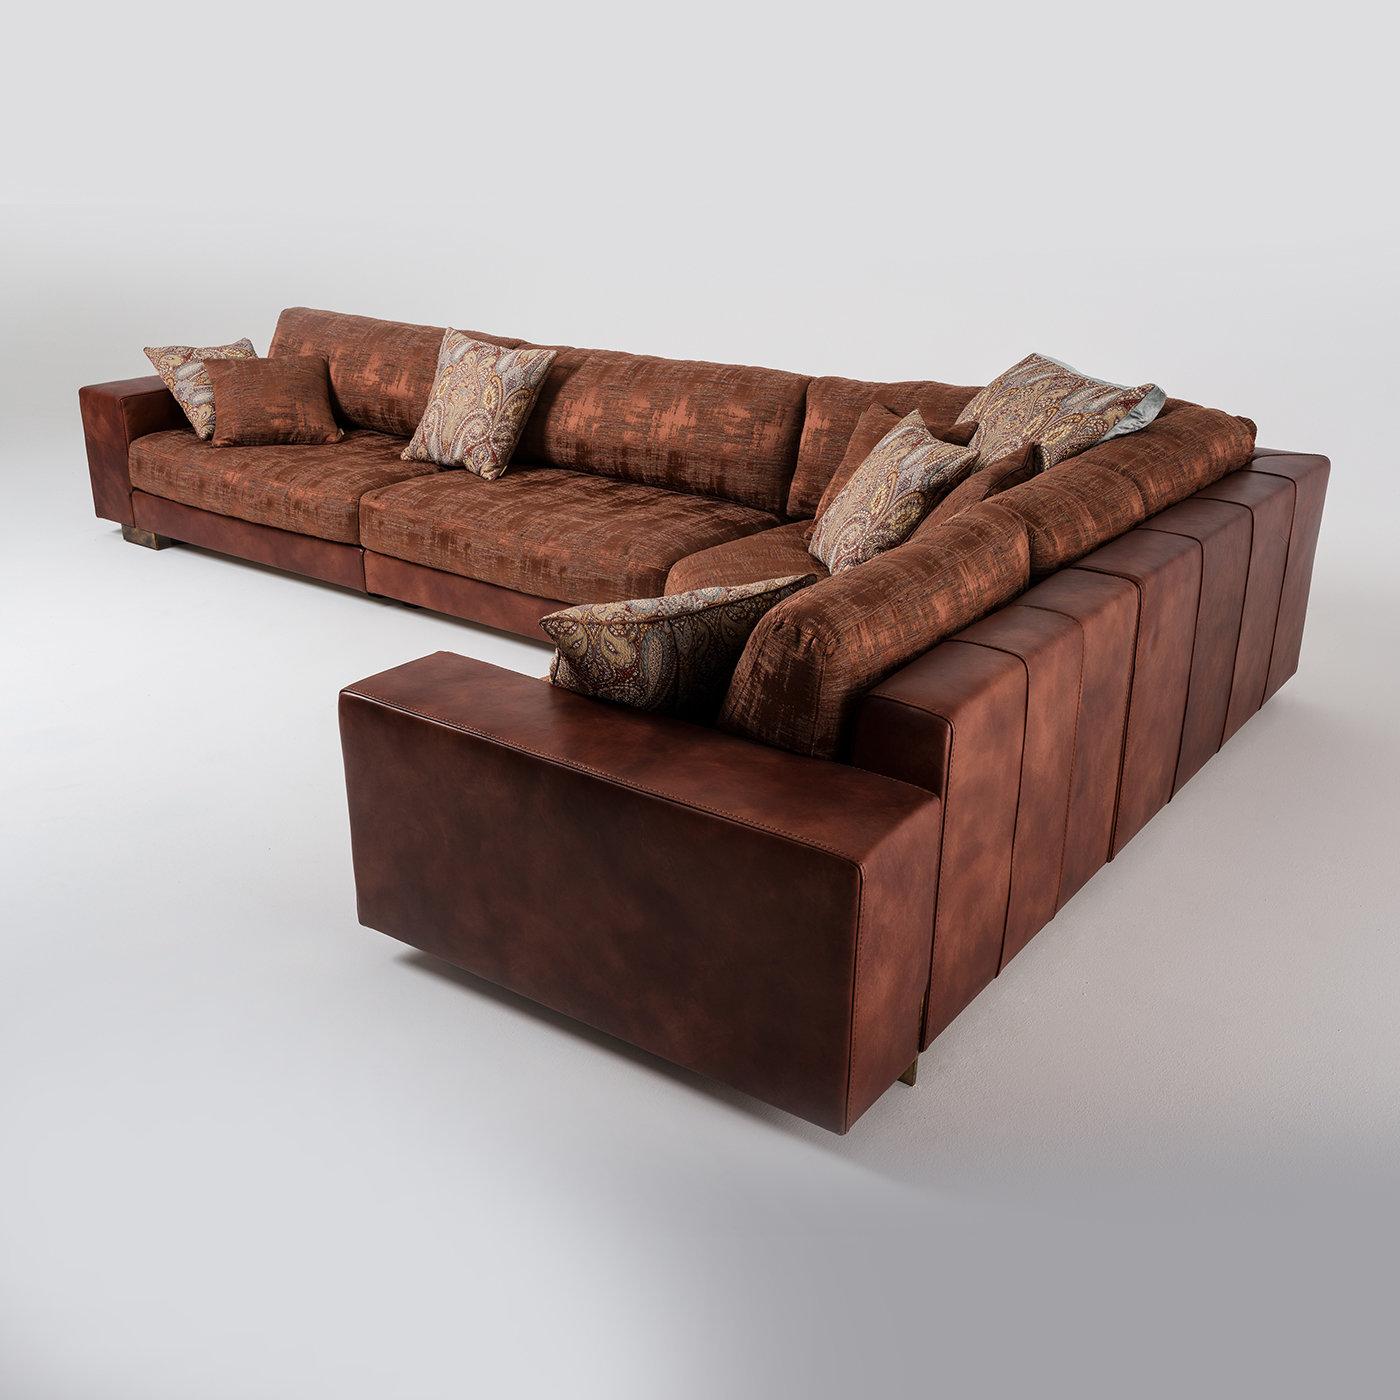 Hand-Crafted Glam Sofa Tribeca Collection by Marco and Giulio Mantellassi For Sale